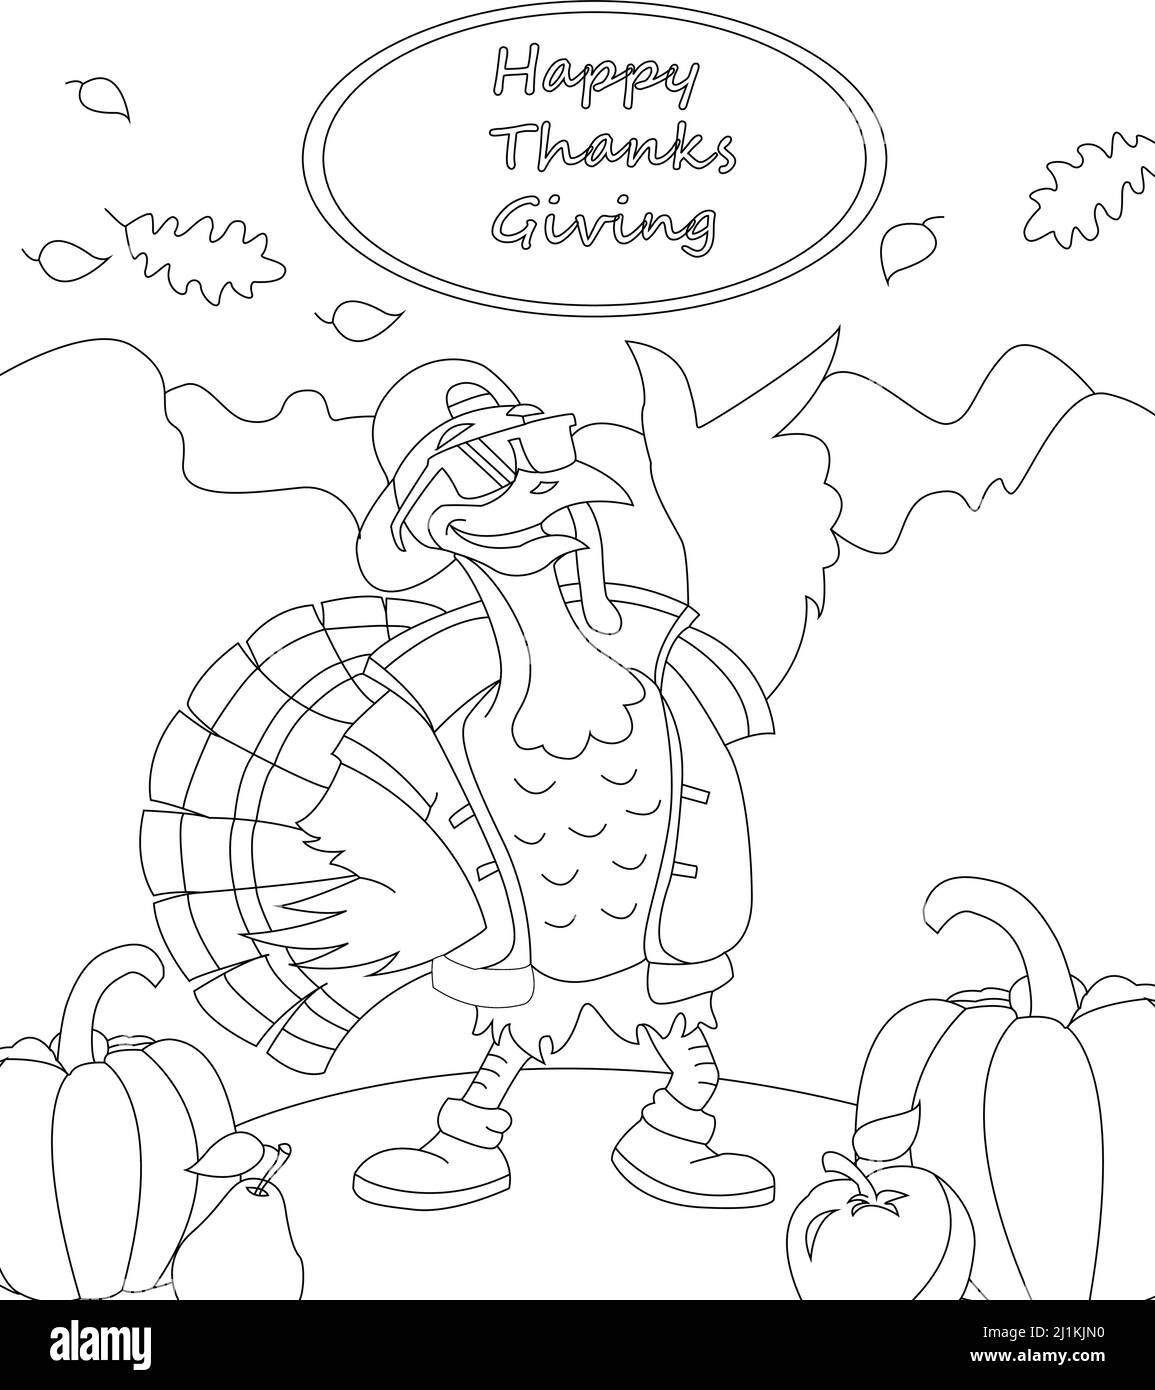 Thanks Giving Coloring Page For kids and aduls Stock Vector